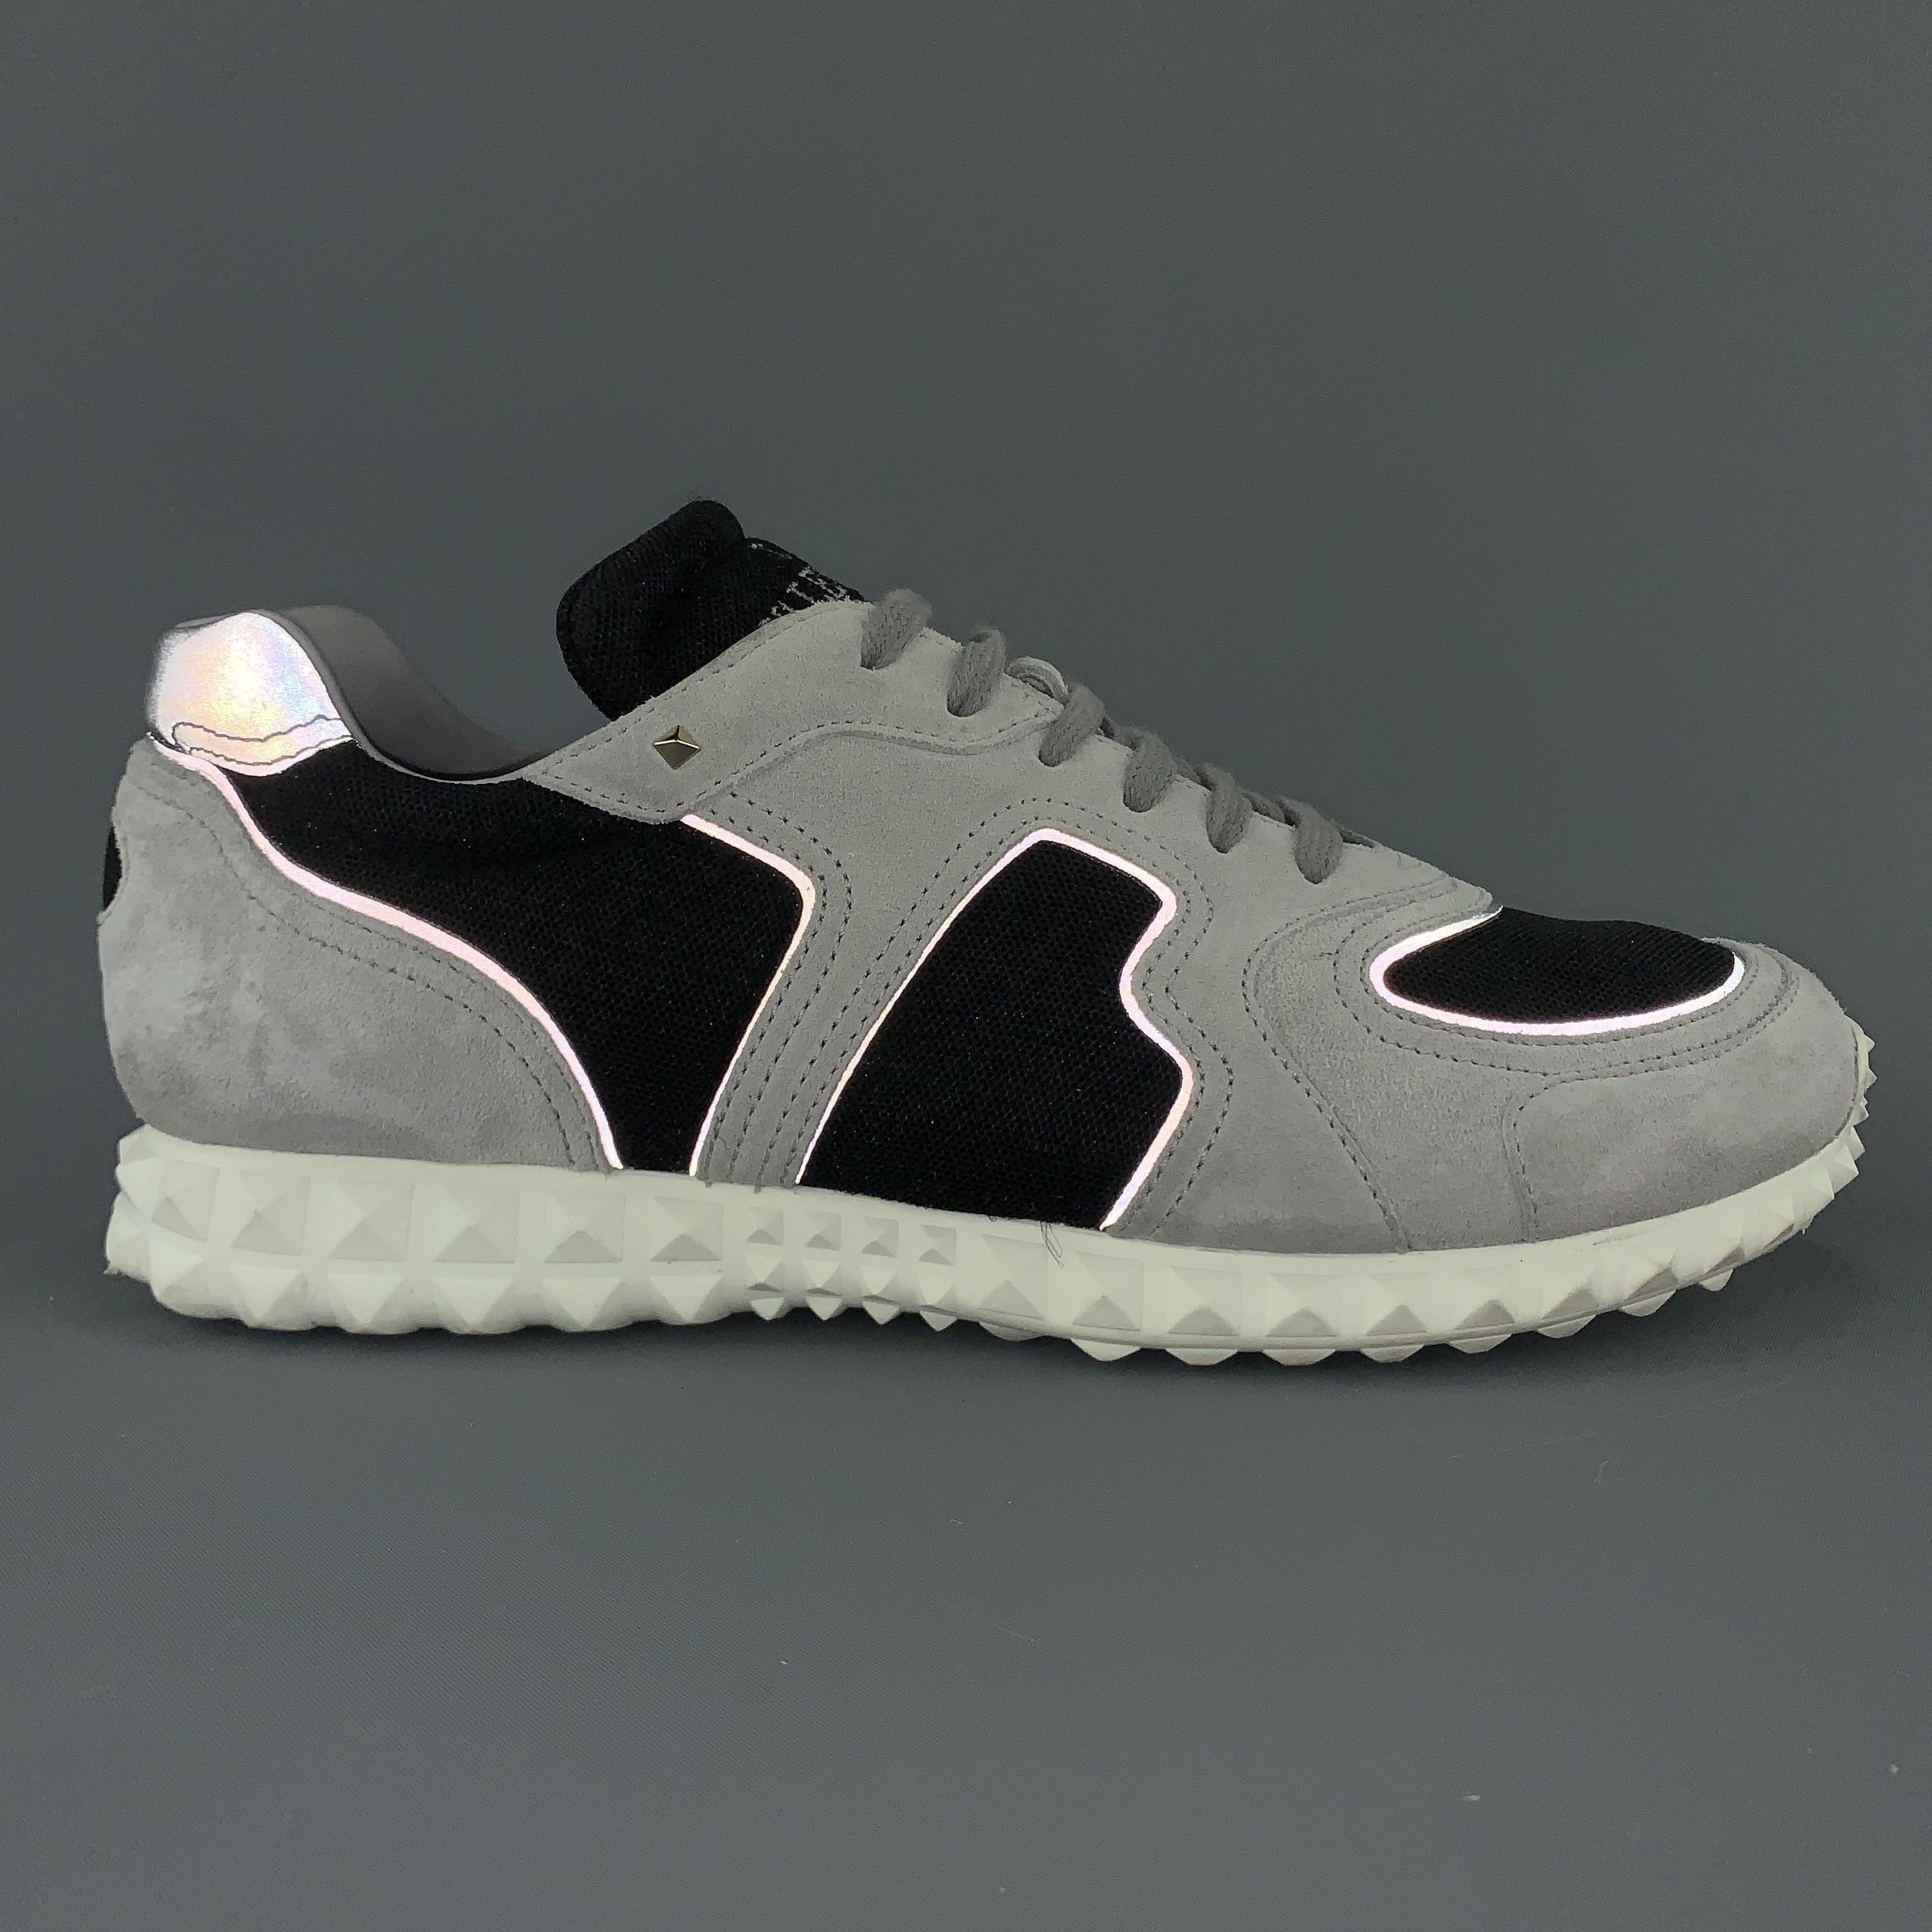 VALENTINO GARAVANI sneakers come in light gray suede with black mesh panels, reflective piping, and white Rockstud texture rubber sole. Made in Italy.

Very Good Pre-Owned Condition.
Marked: IT 42.5

Outsole: 11.5 x 4 in.